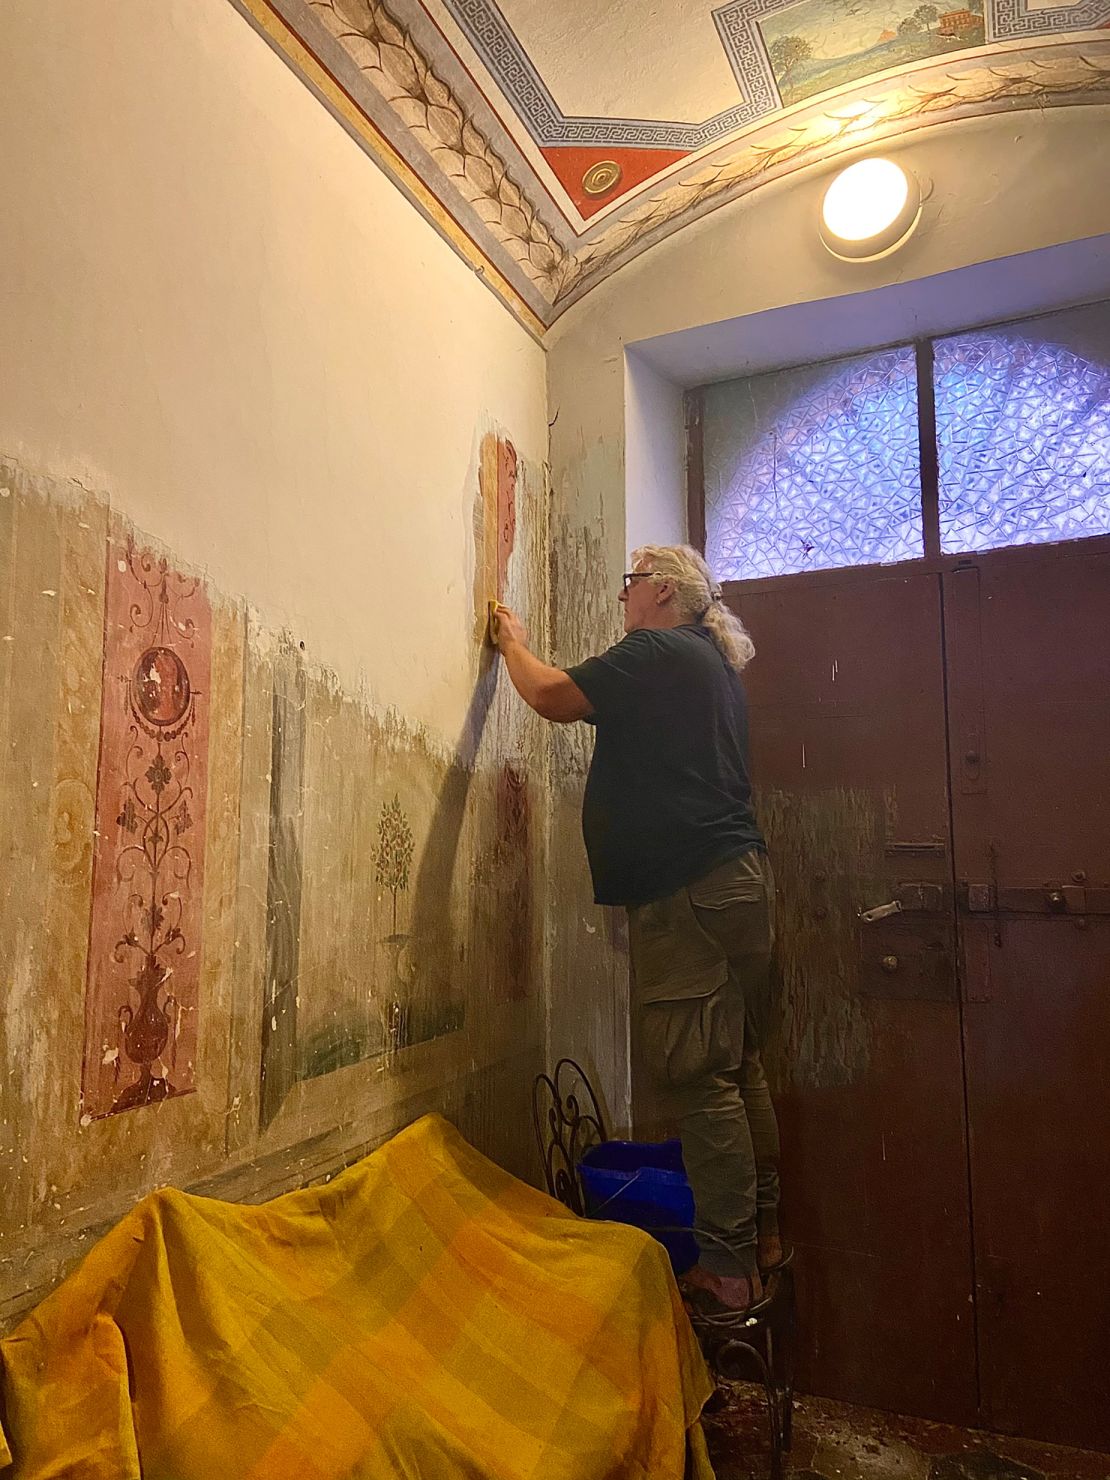 Jess and Kelly have been painstakingly removing the paint covering some hidden frescoes in the property.